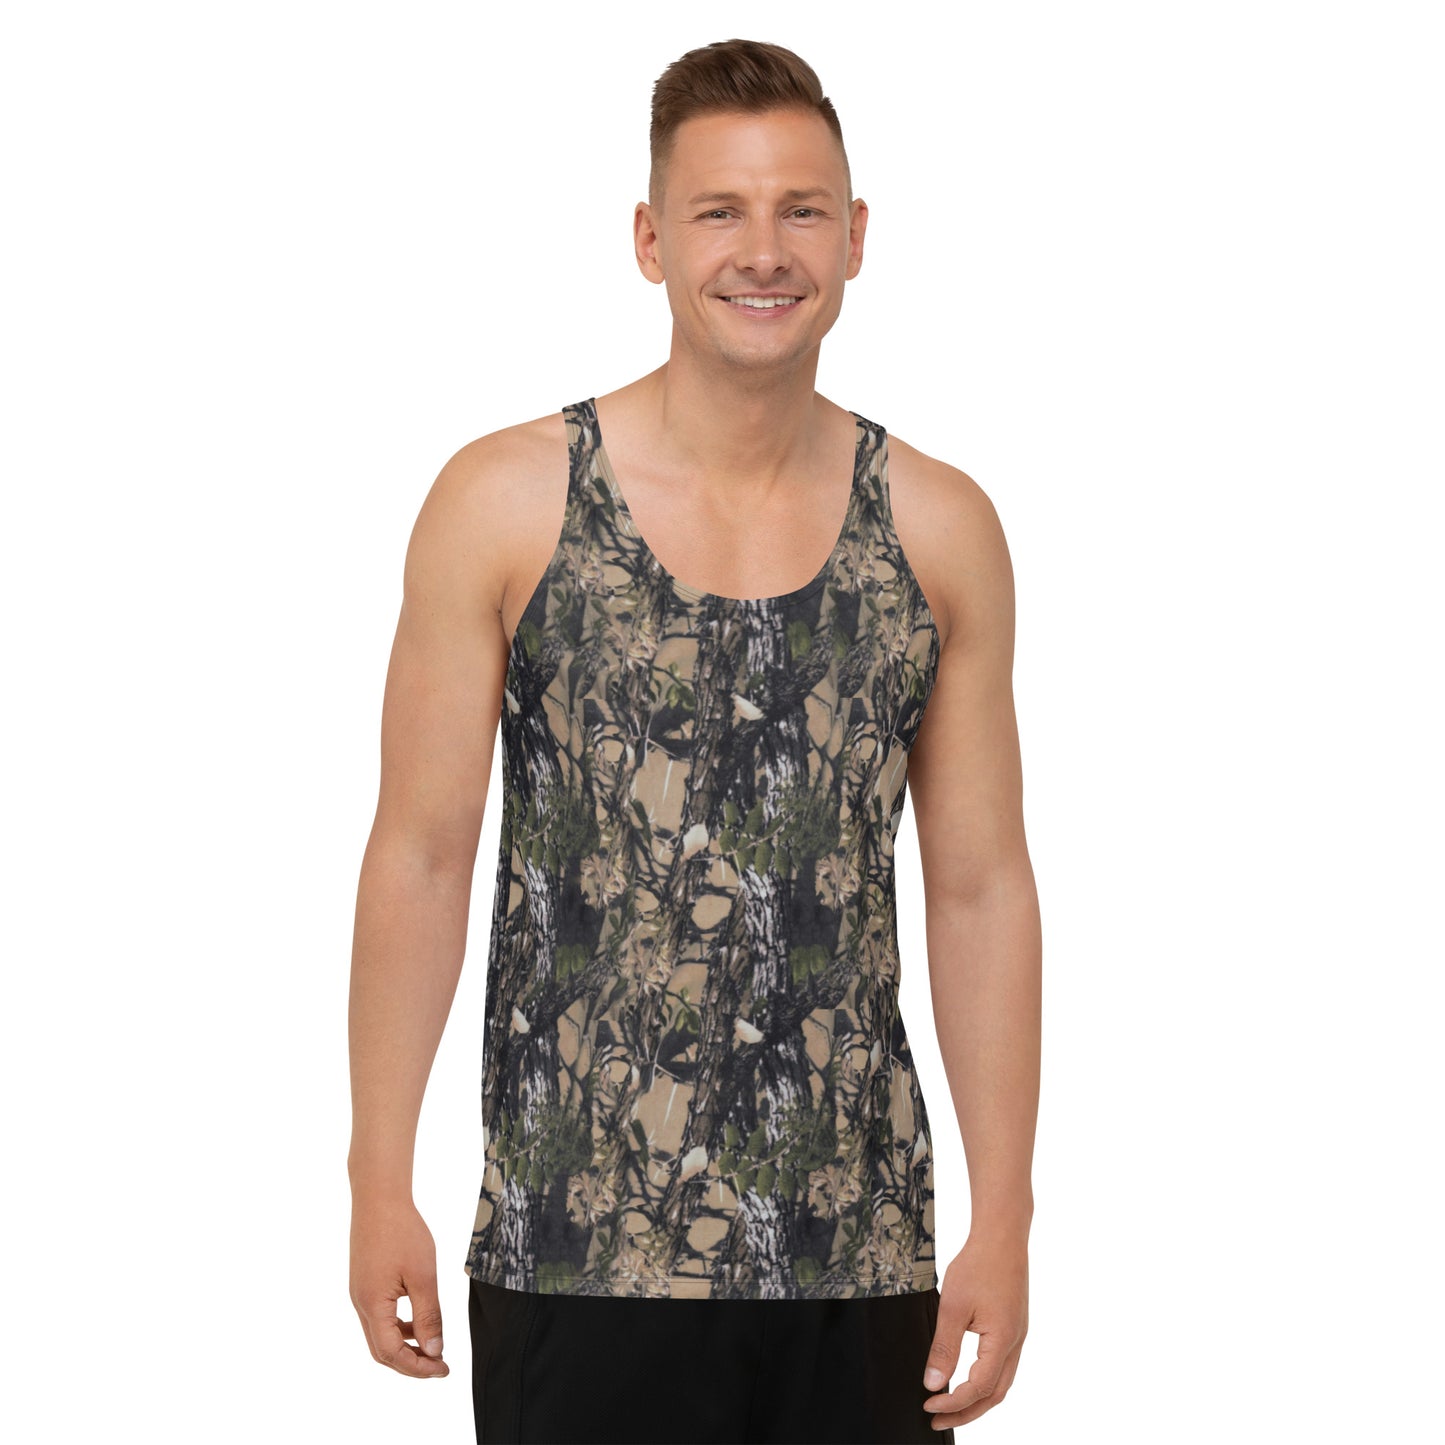 a picture of a man wearing a unisex all over printed Camouflage tank top - front side